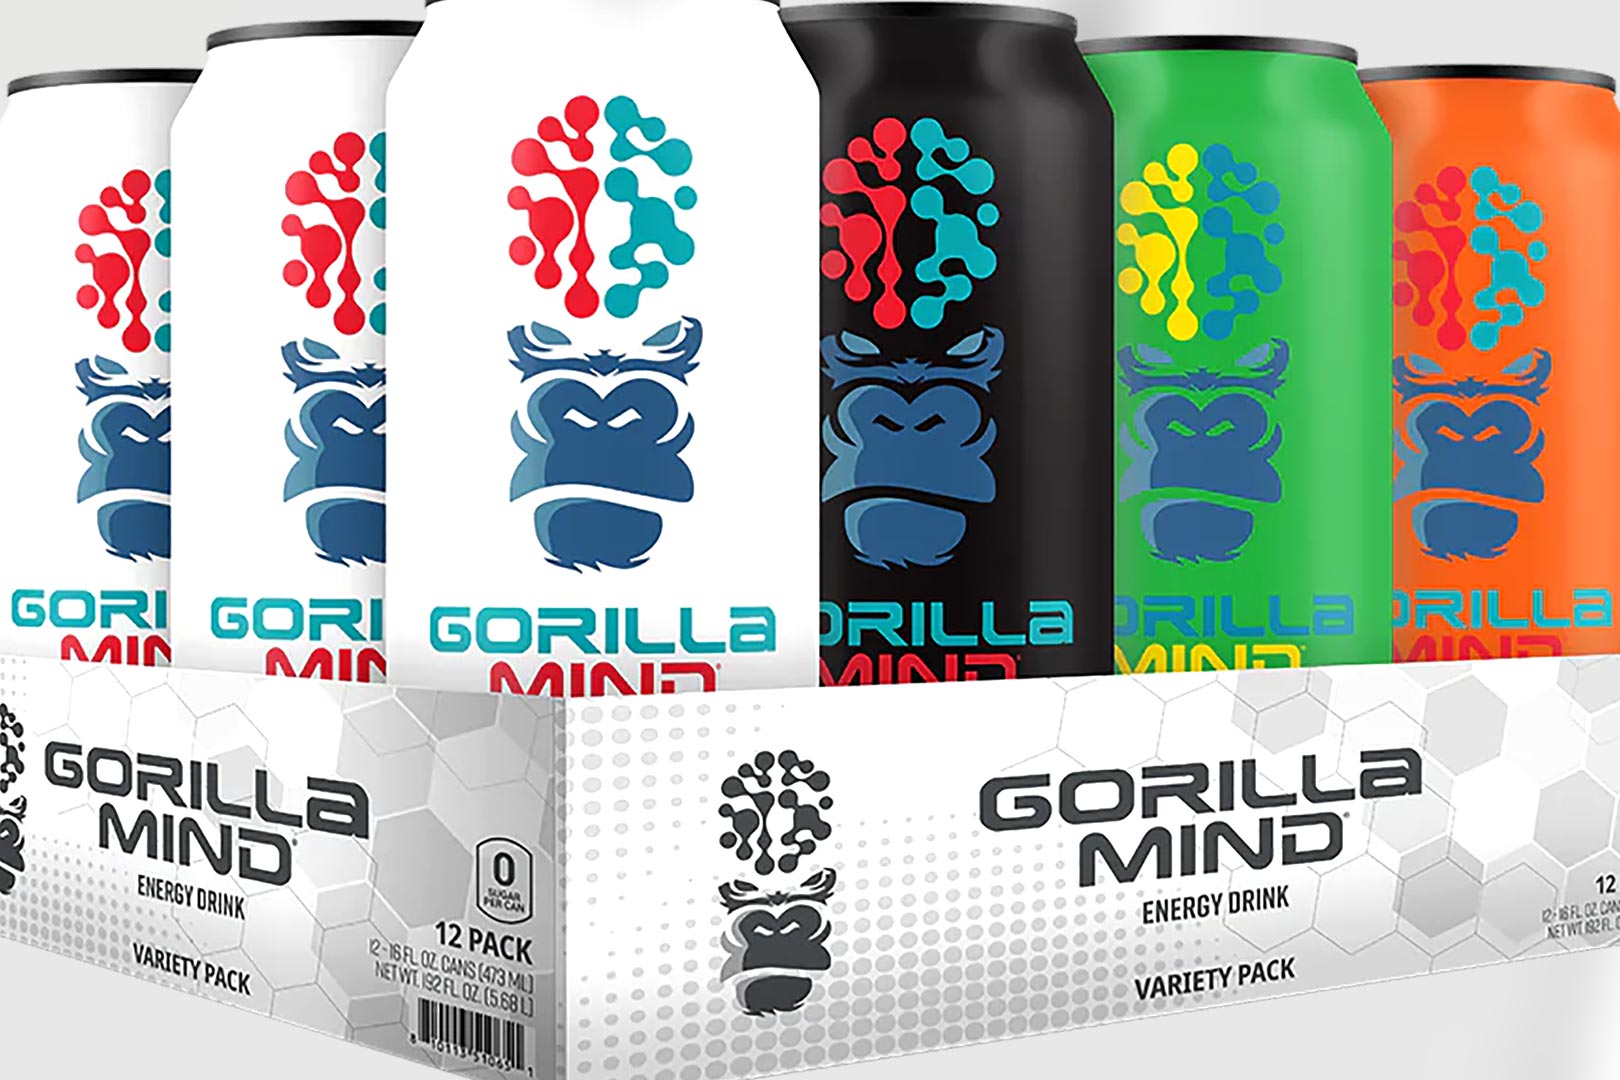 Gorilla Mind Energy Drink Sells Out Fast